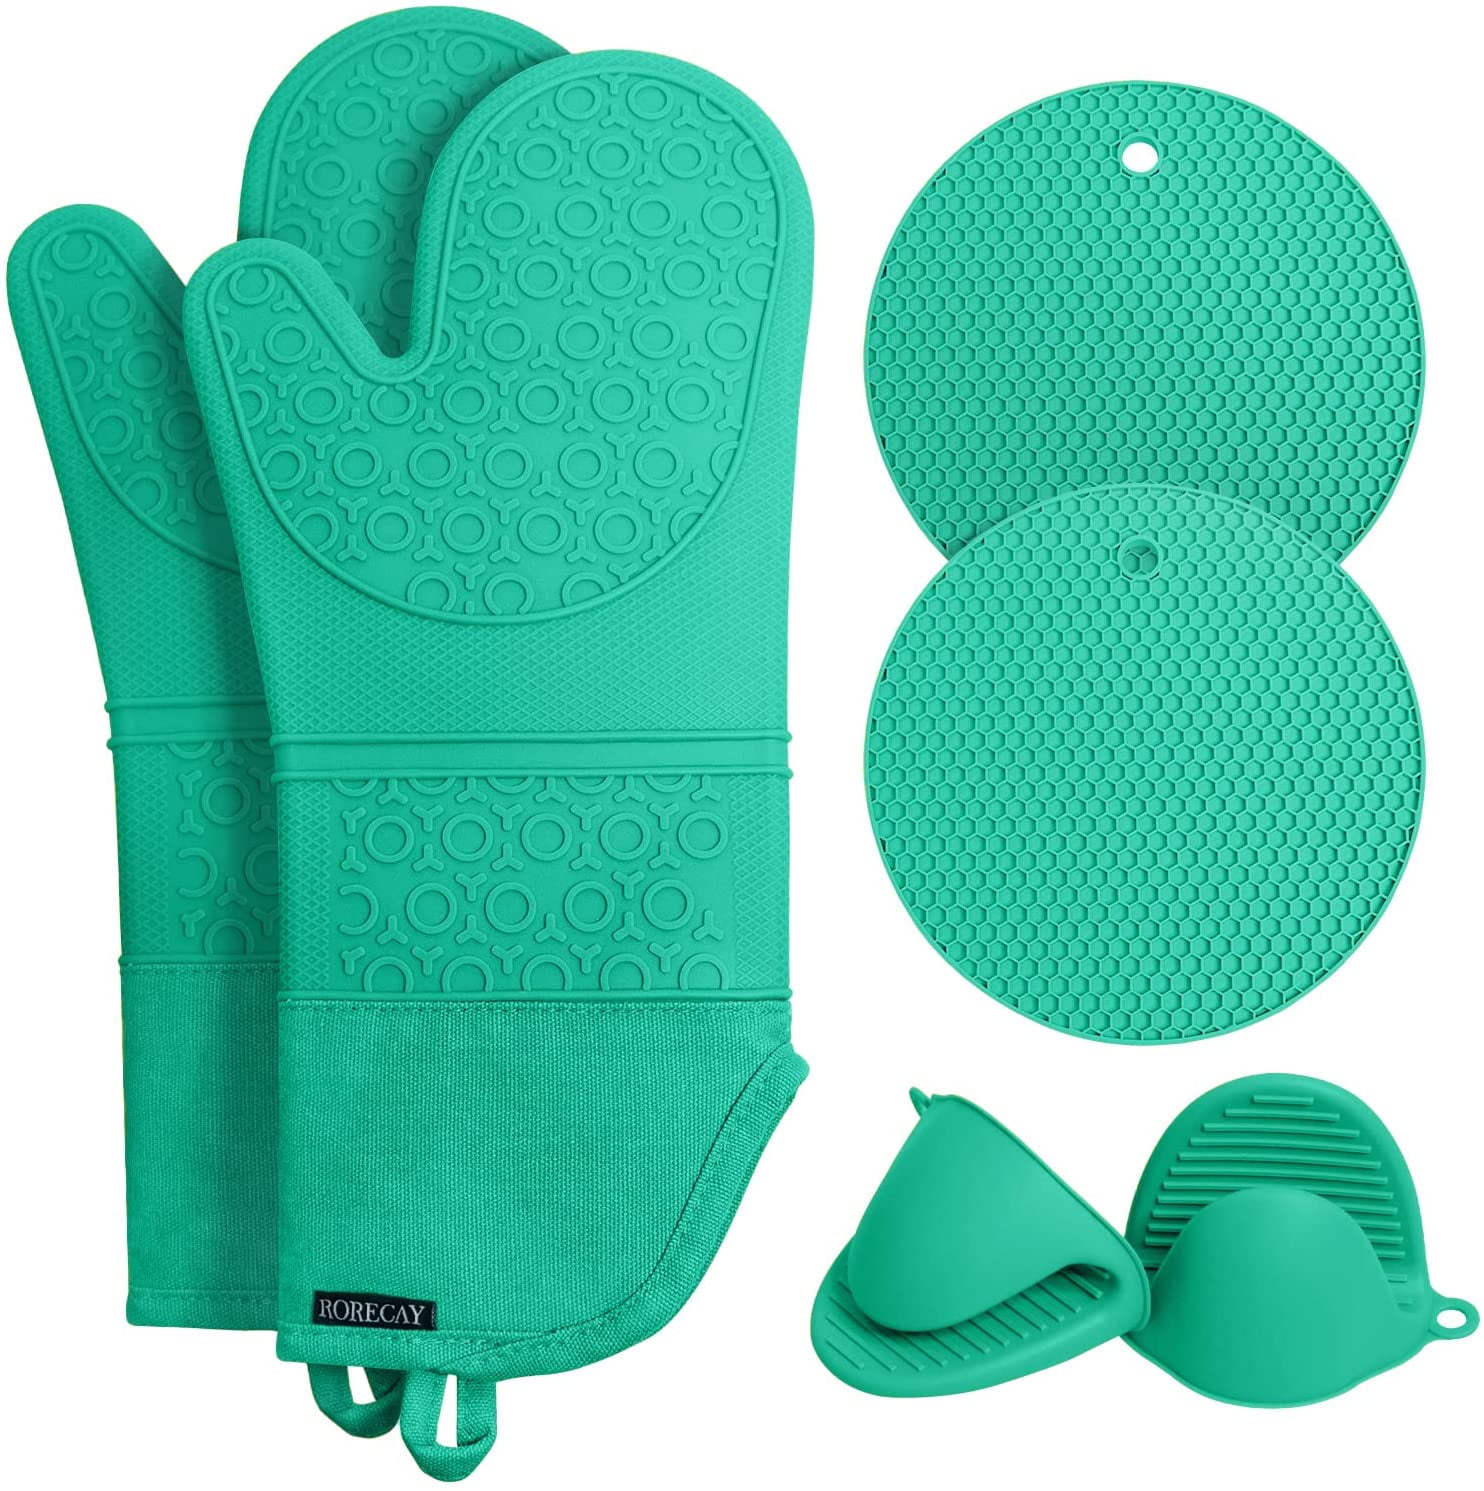 Oven Mitts and Pot Holders Set 6pcs, Kitchen Oven Glove,High Heat Resistant  550 Degree Extra Long Oven Mitts and Potholder with Non-Slip Silicone